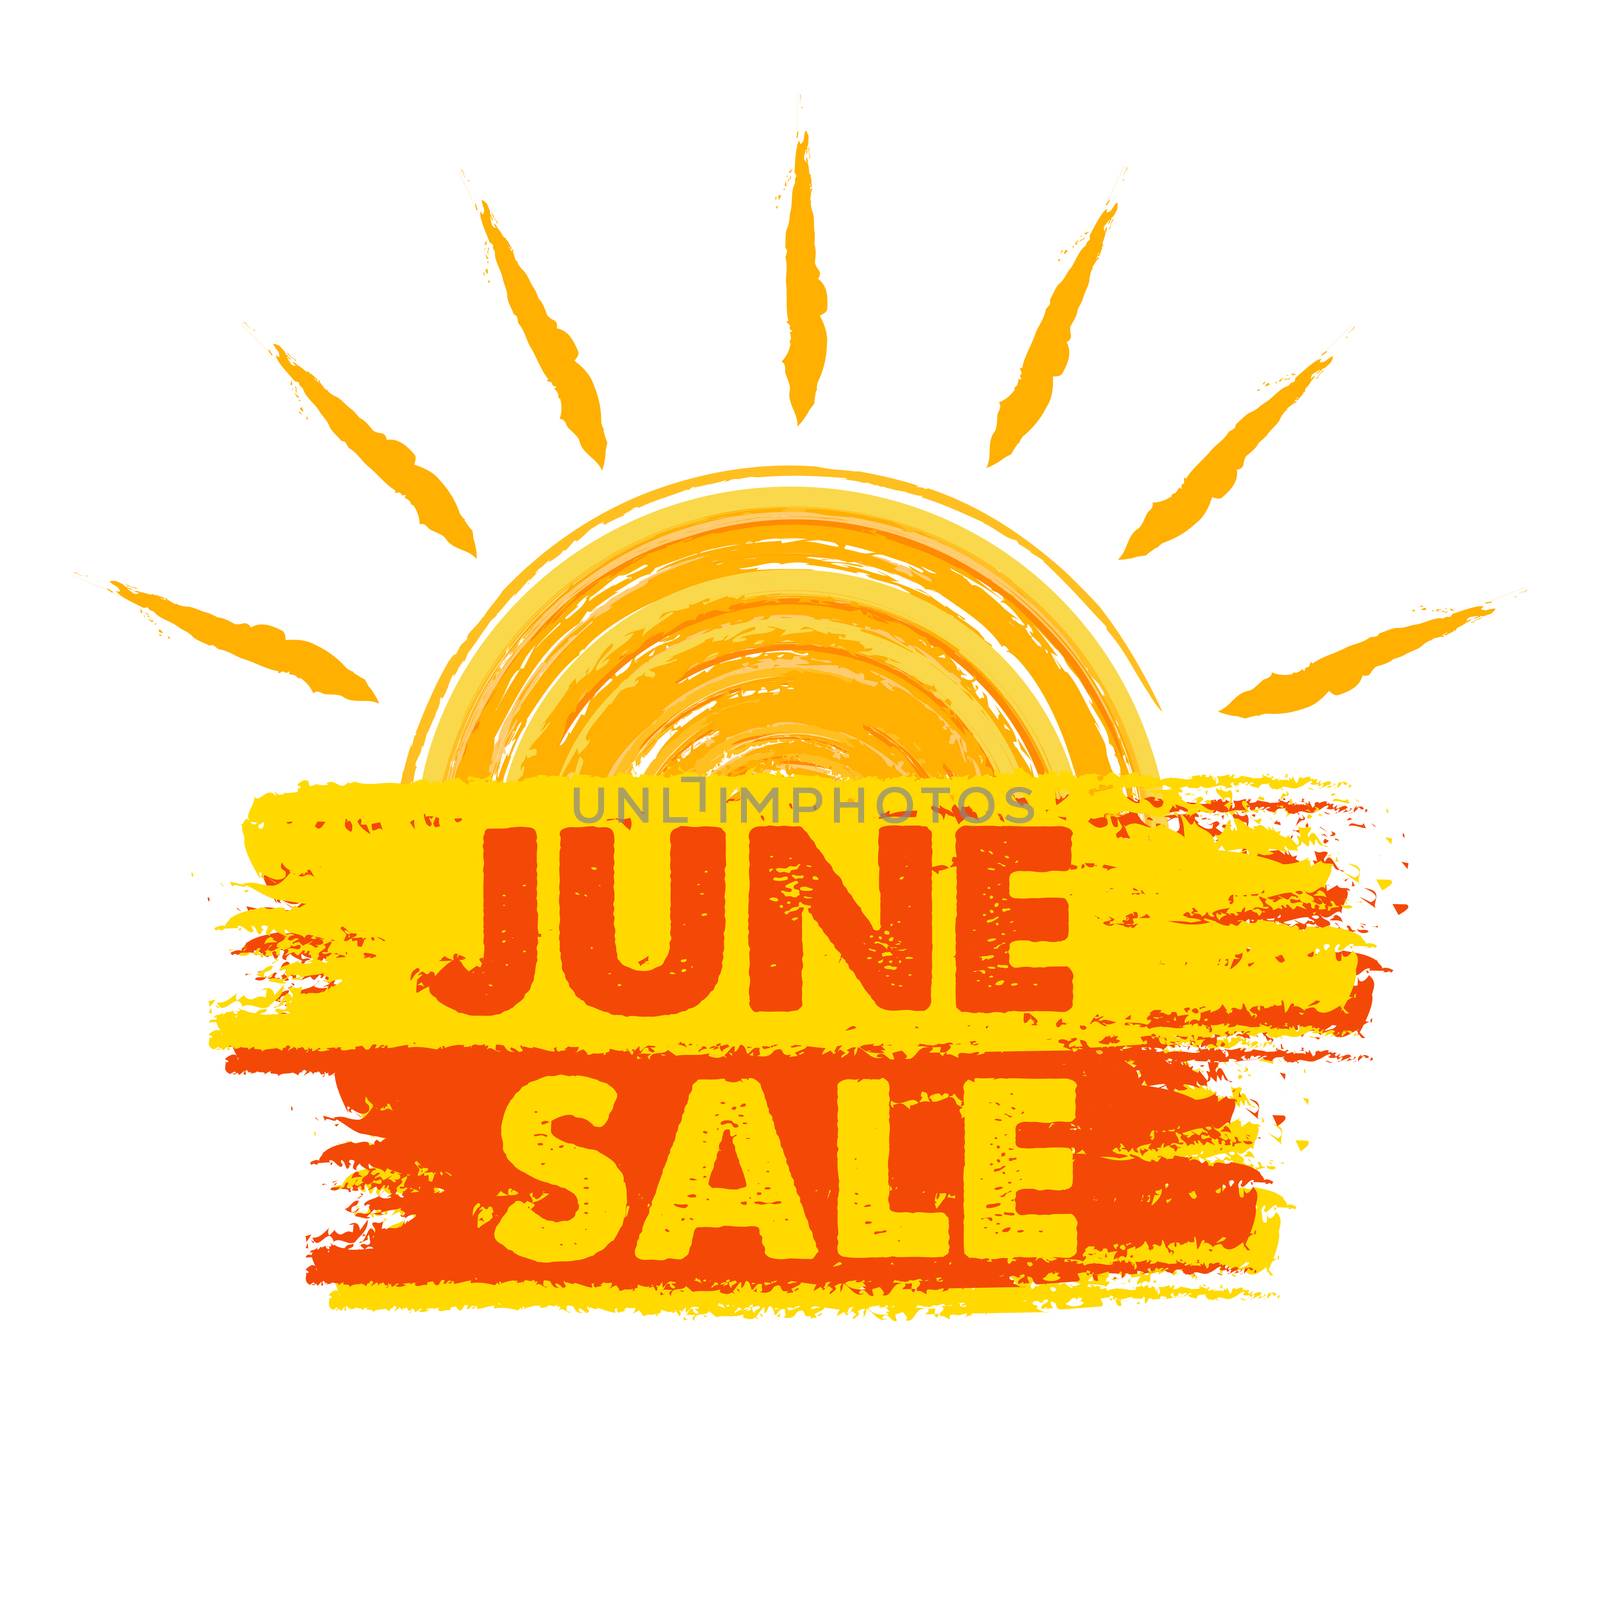 june sale summer banner - text in yellow and orange drawn label with sun symbol, business seasonal shopping concept